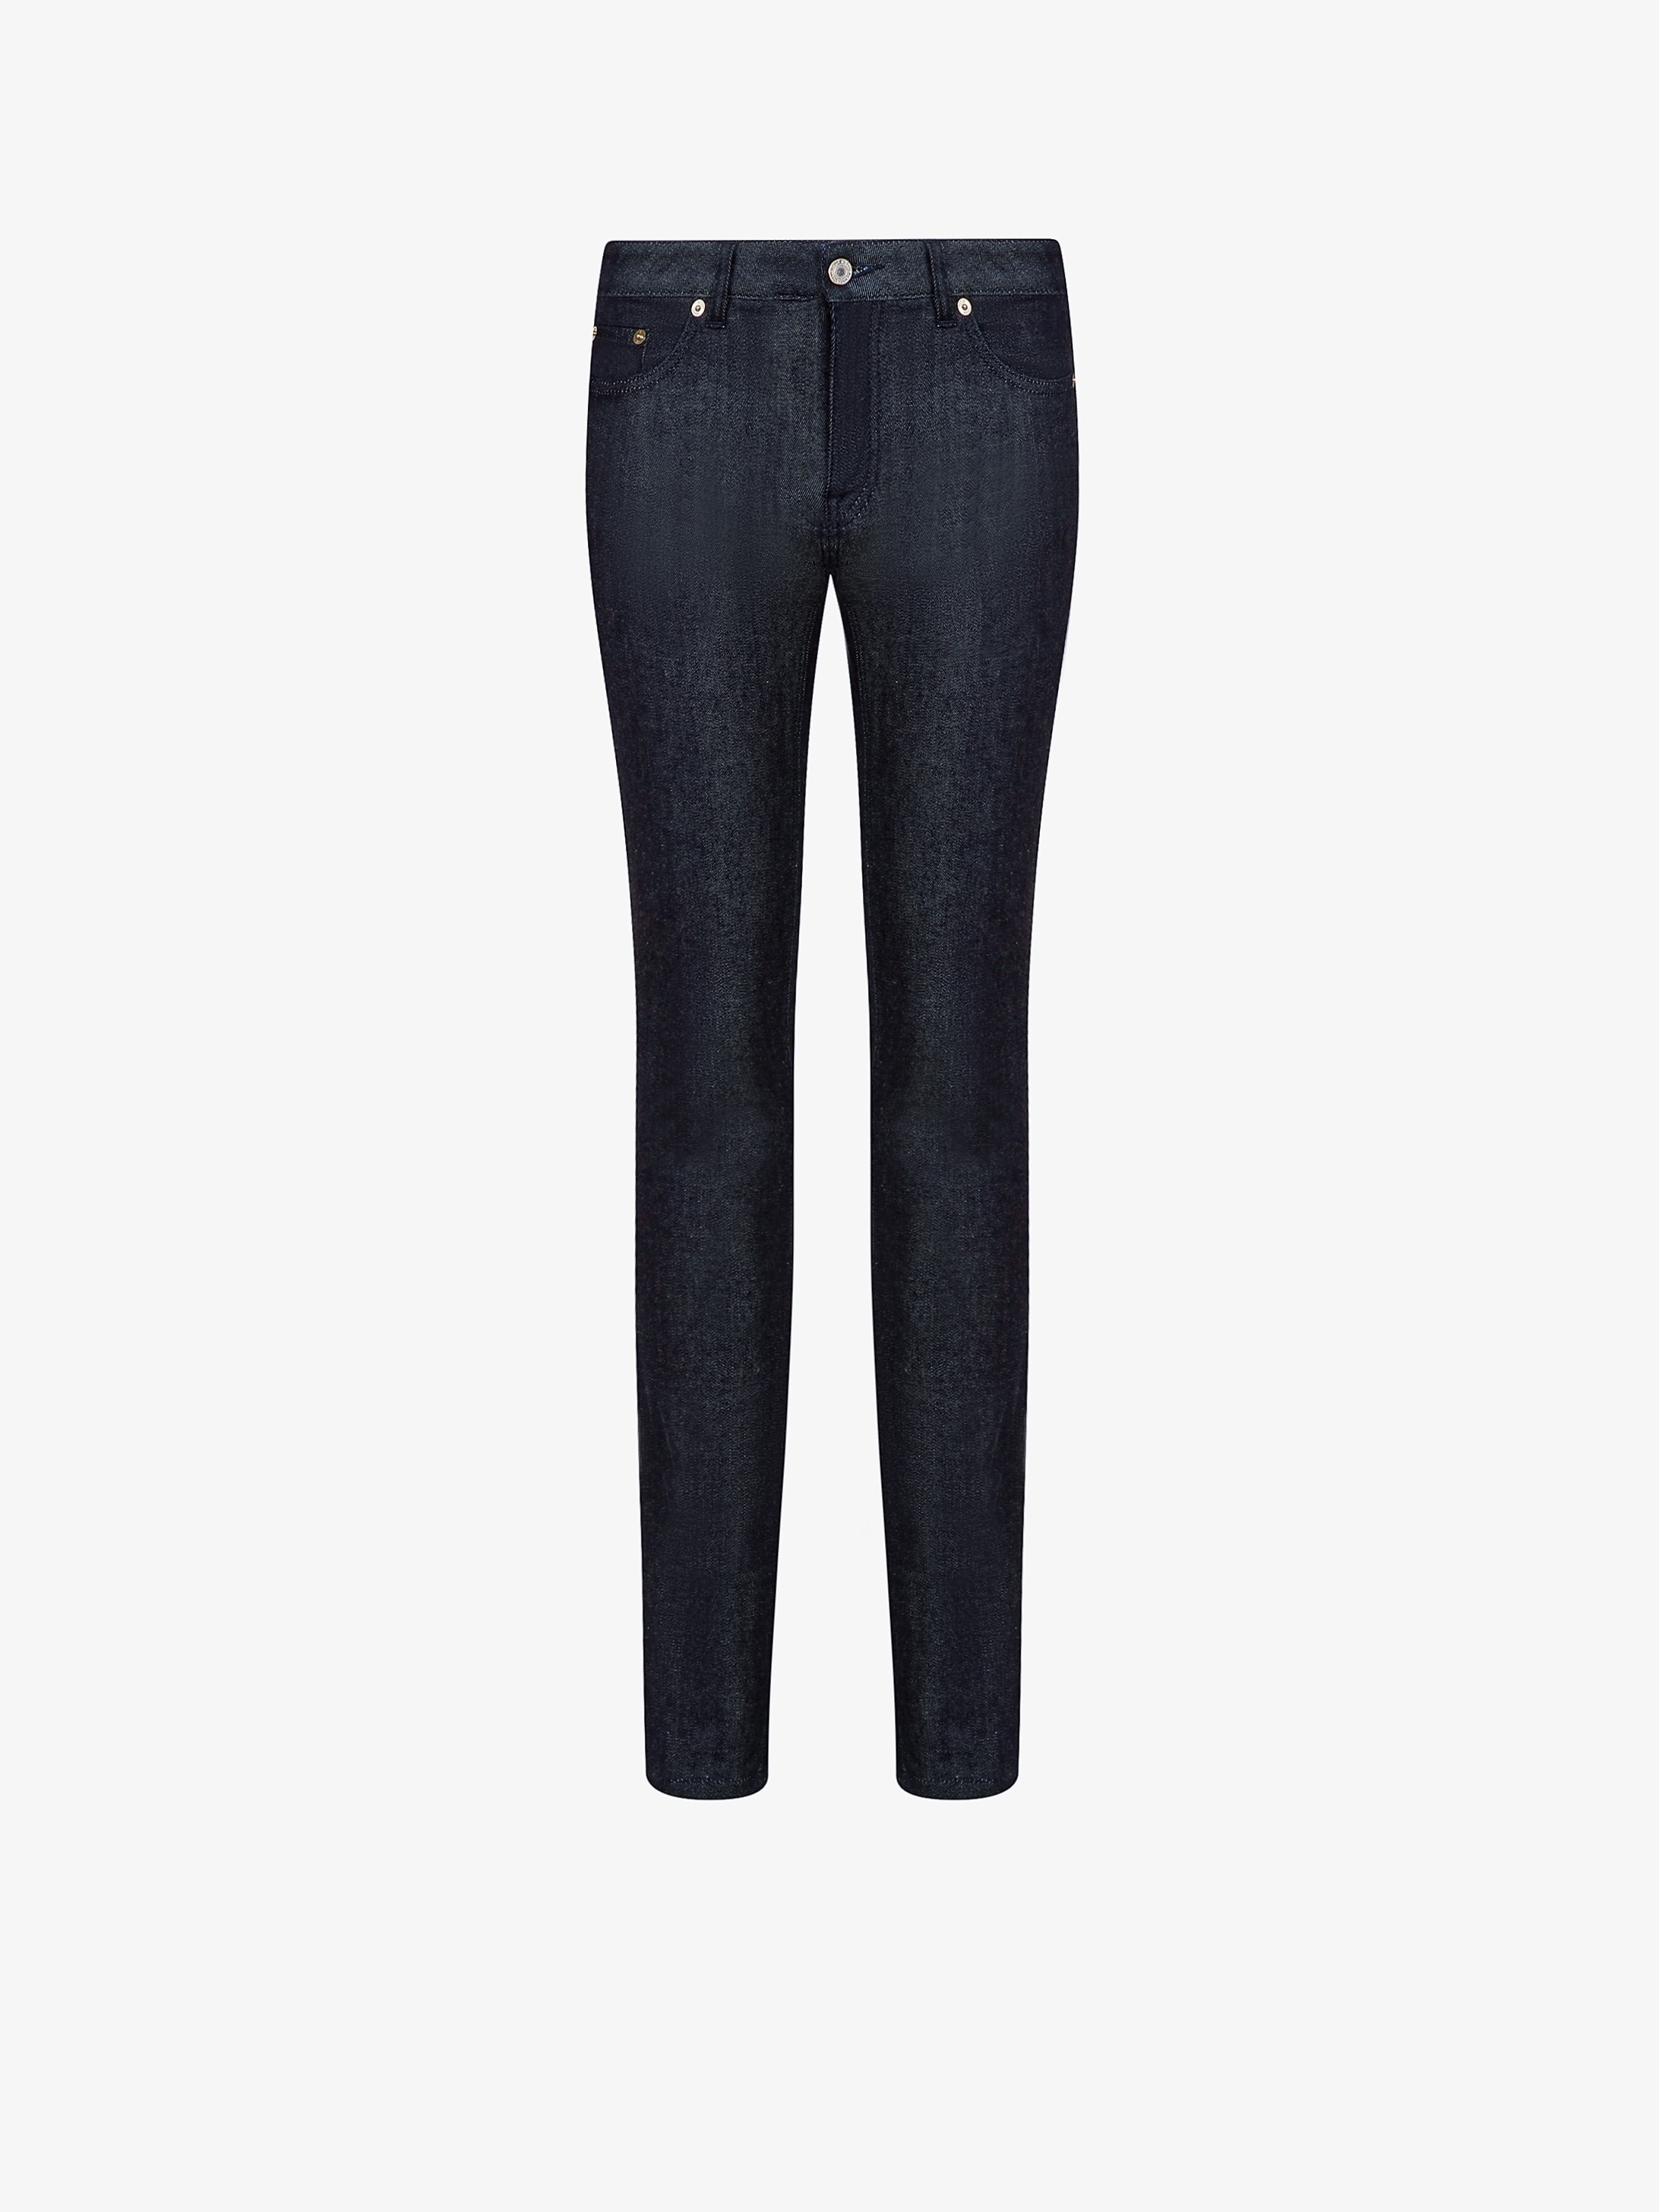 givenchy jeans womens